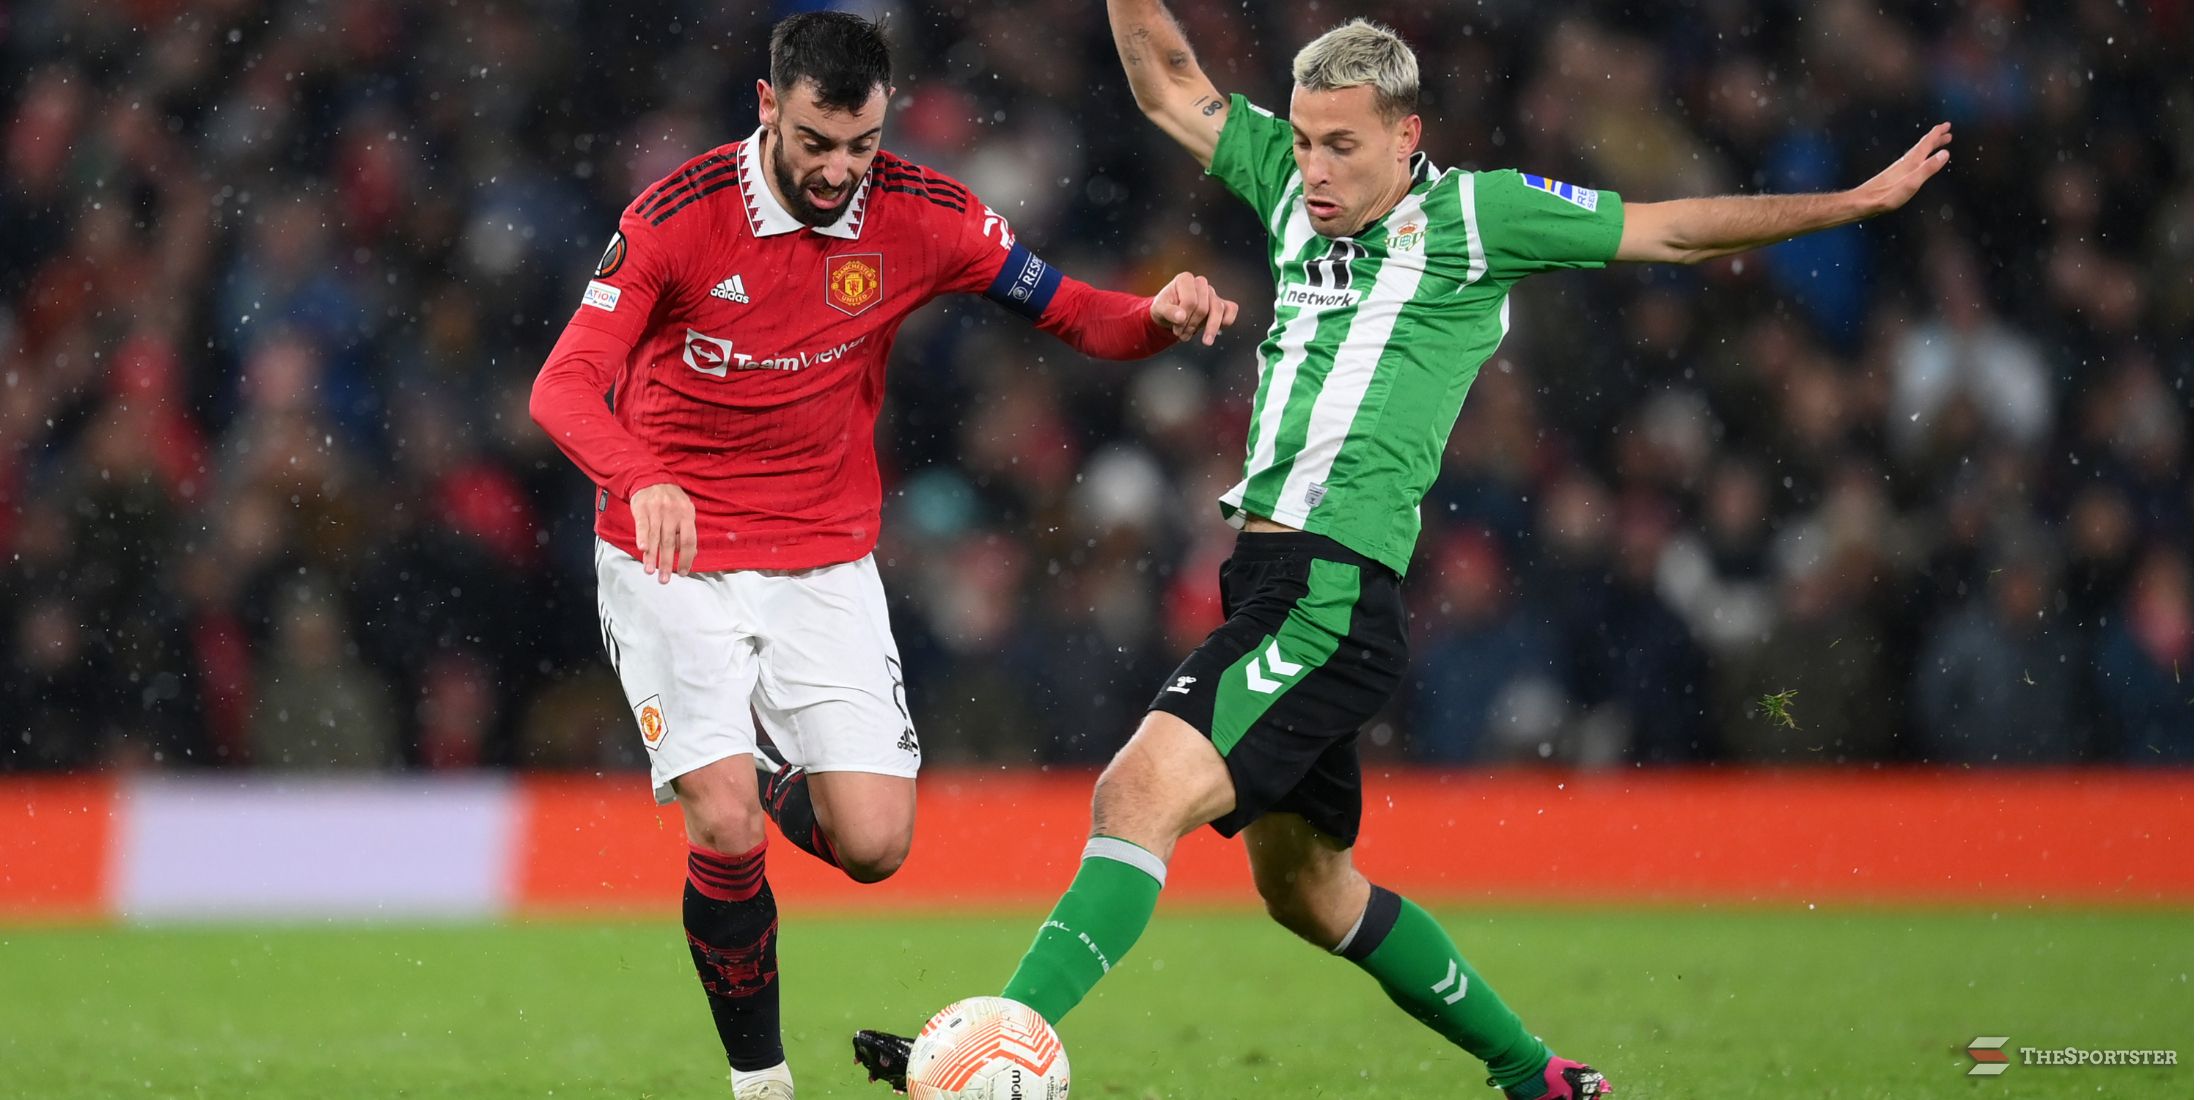 MANCHESTER, ENGLAND - MARCH 09: Bruno Fernandes of Manchester United and Sergio Canales of Real Betis battle for the ball during the UEFA Europa League round of 16 leg one match between Manchester United and Real Betis at Old Trafford on March 09, 2023 in Manchester, England. (Photo by Shaun Botterill/Getty Images)